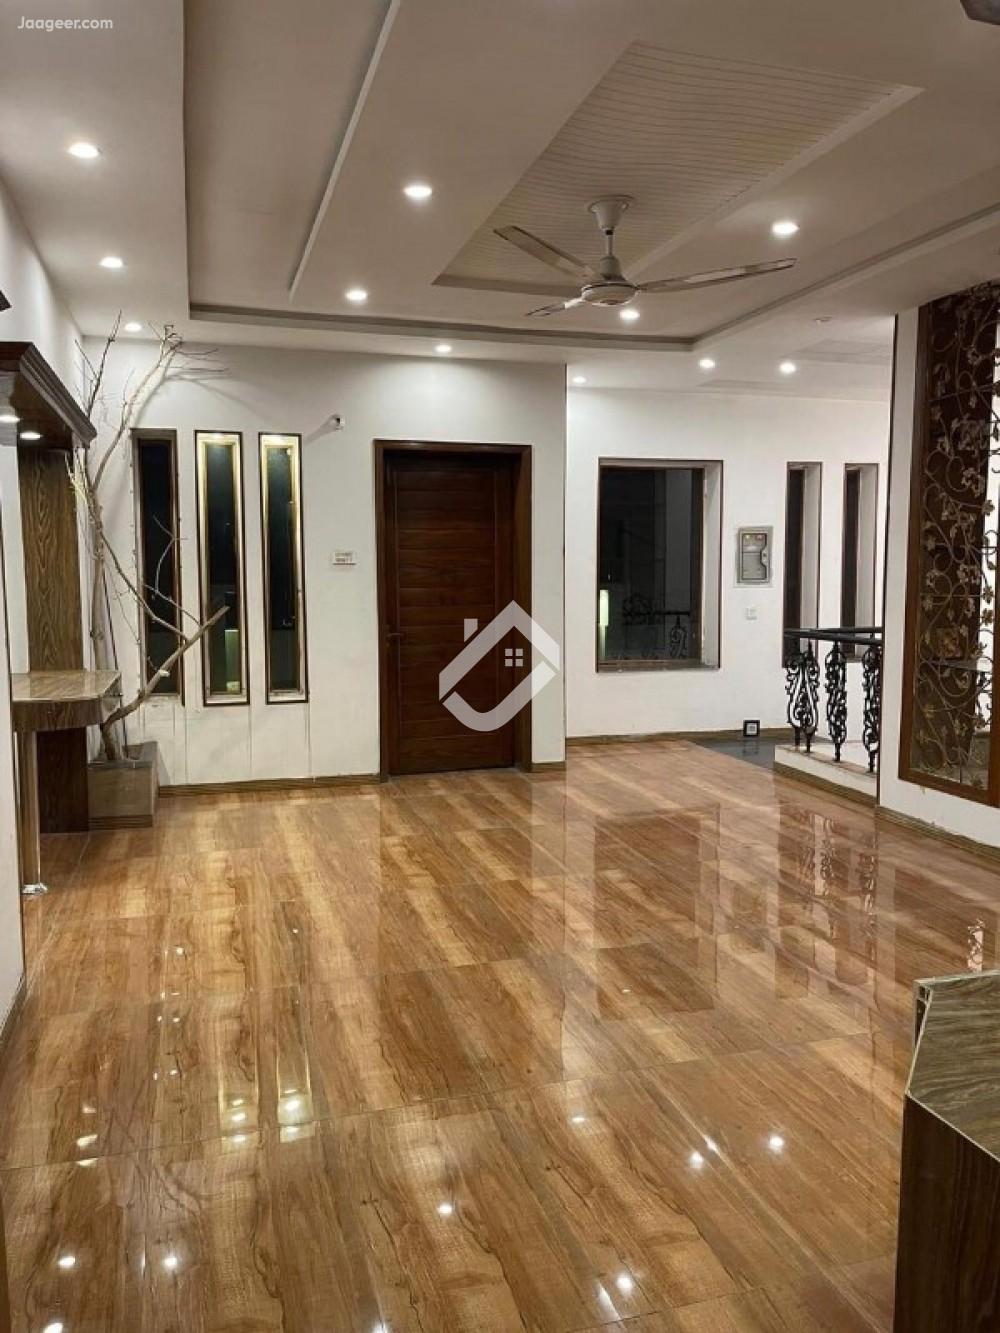 View  10 Marla Double Storey House For Sale In Allama Iqbal Town   in Allama Iqbal Town, Lahore